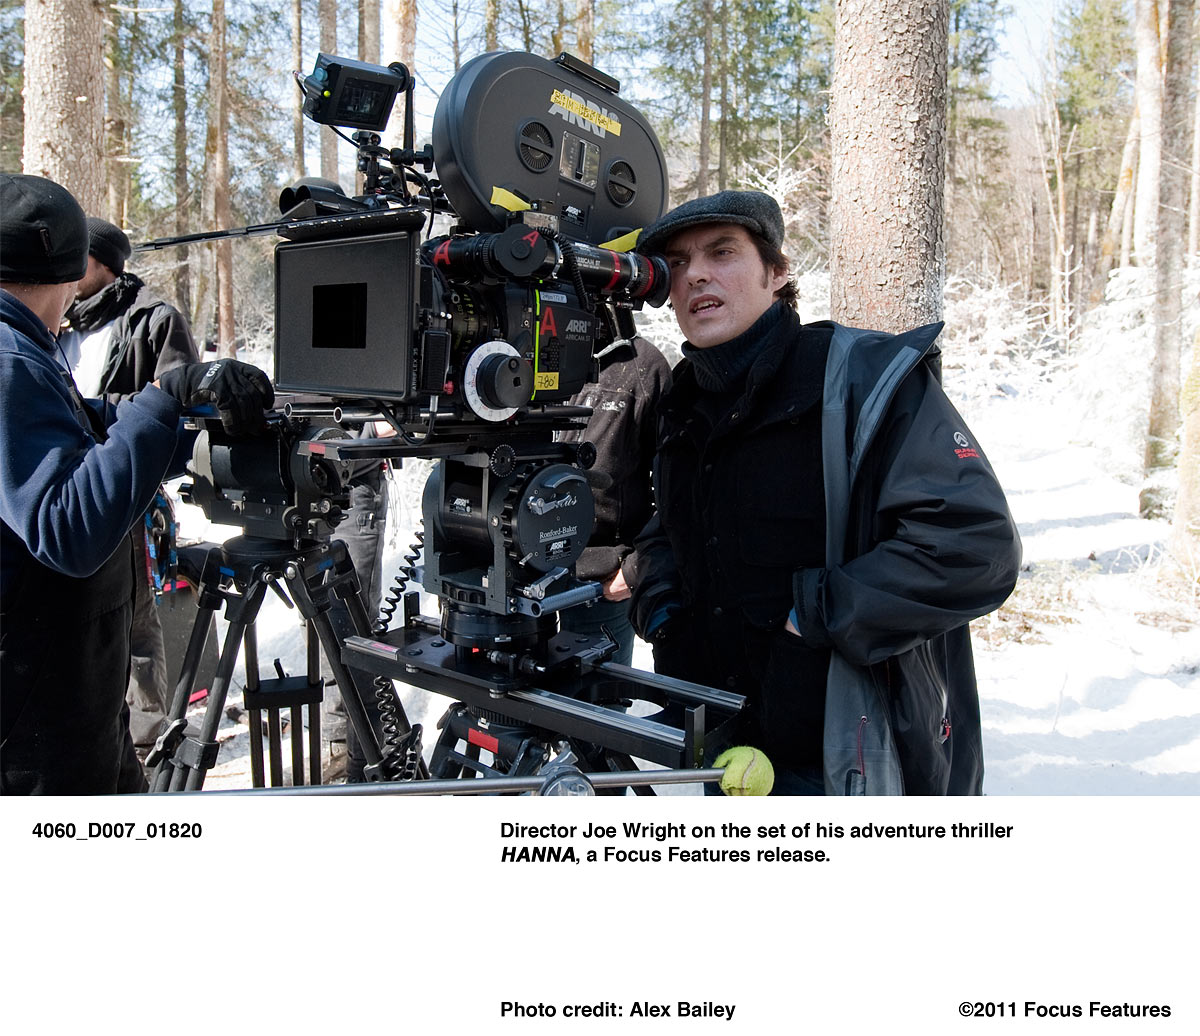 Director Joe Wright on the set of his adventure thriller HANNA, a Focus Features release. Photo credit: Alex Bailey.